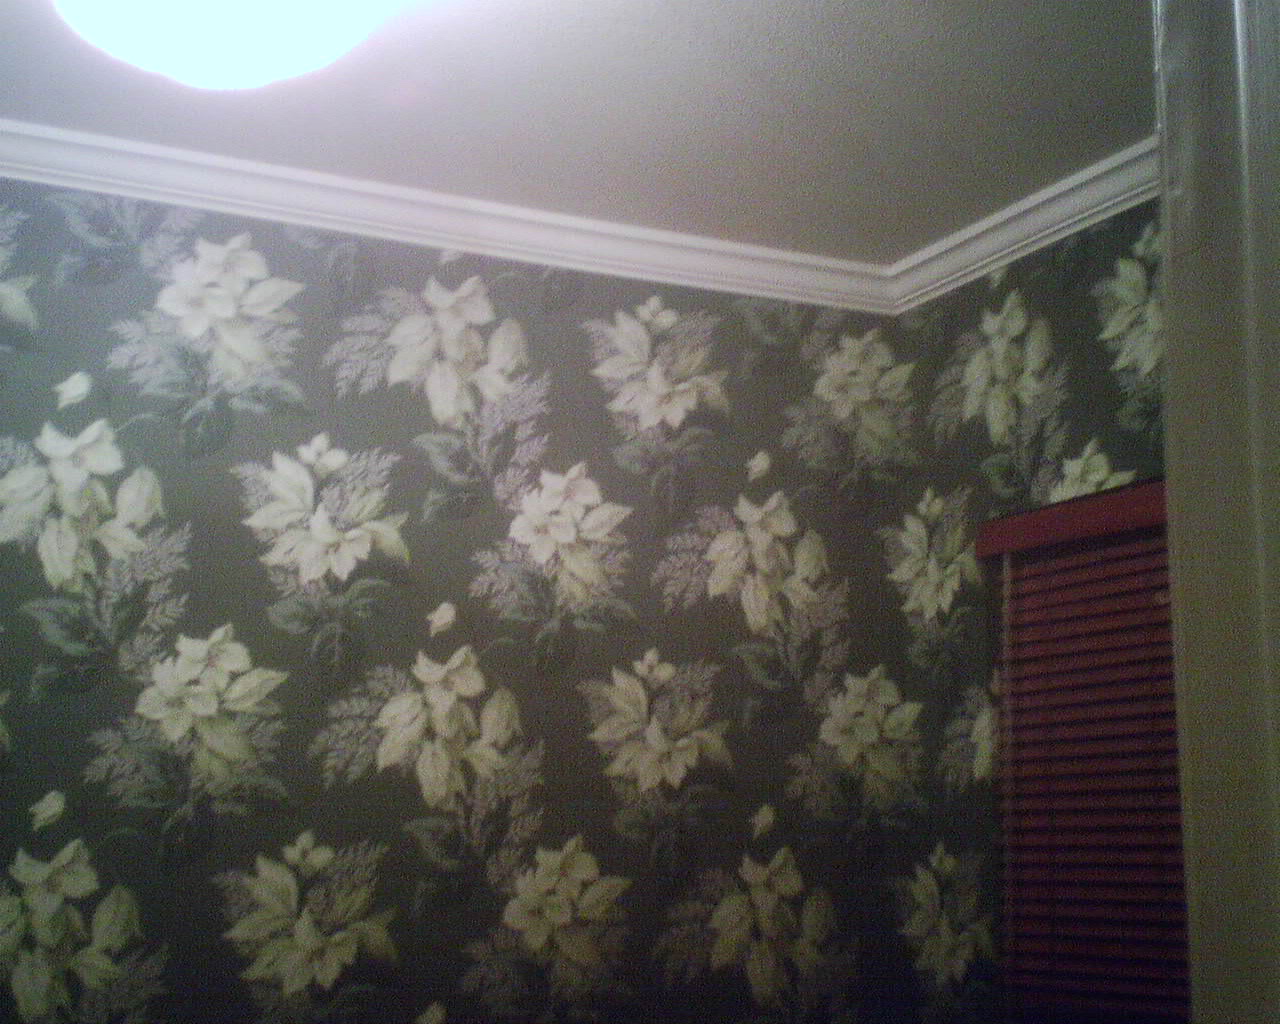 1930s Wallpaper in the Wallpaper Ladys Home Office